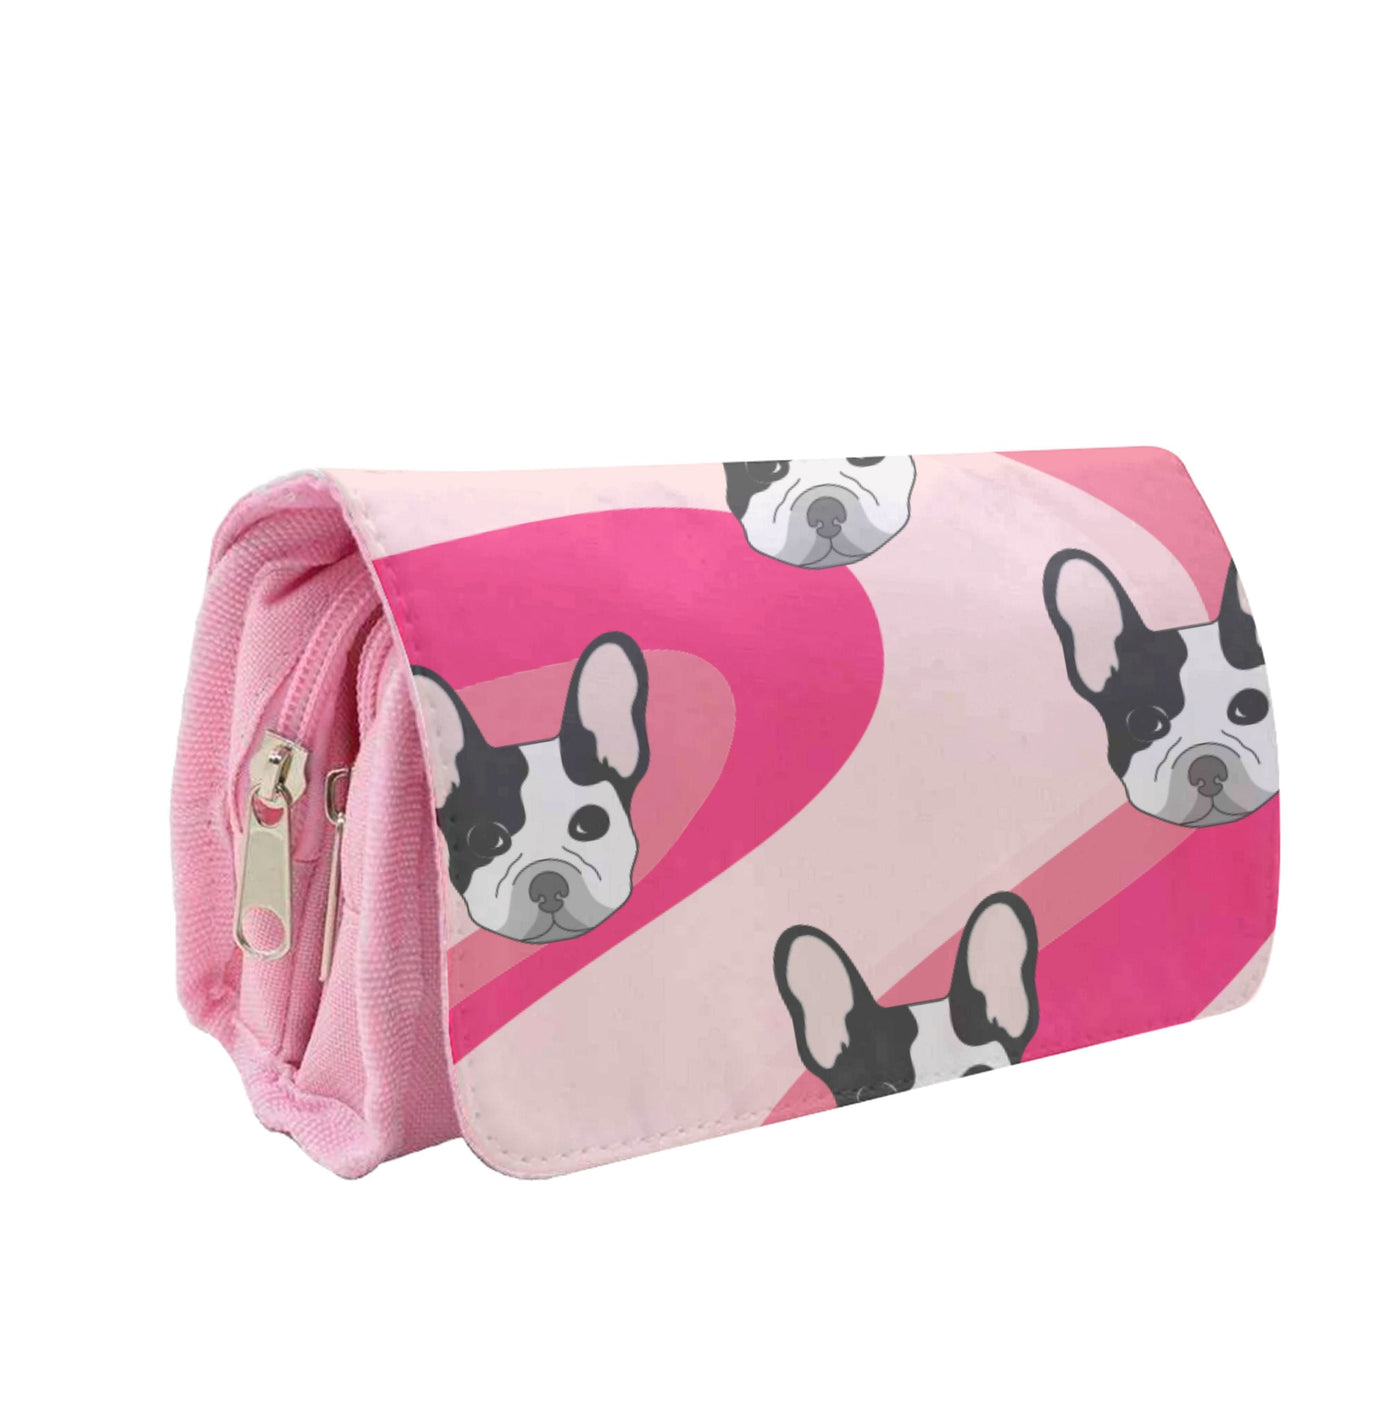 Abstact Frenchie - Dog Pattern Pencil Case